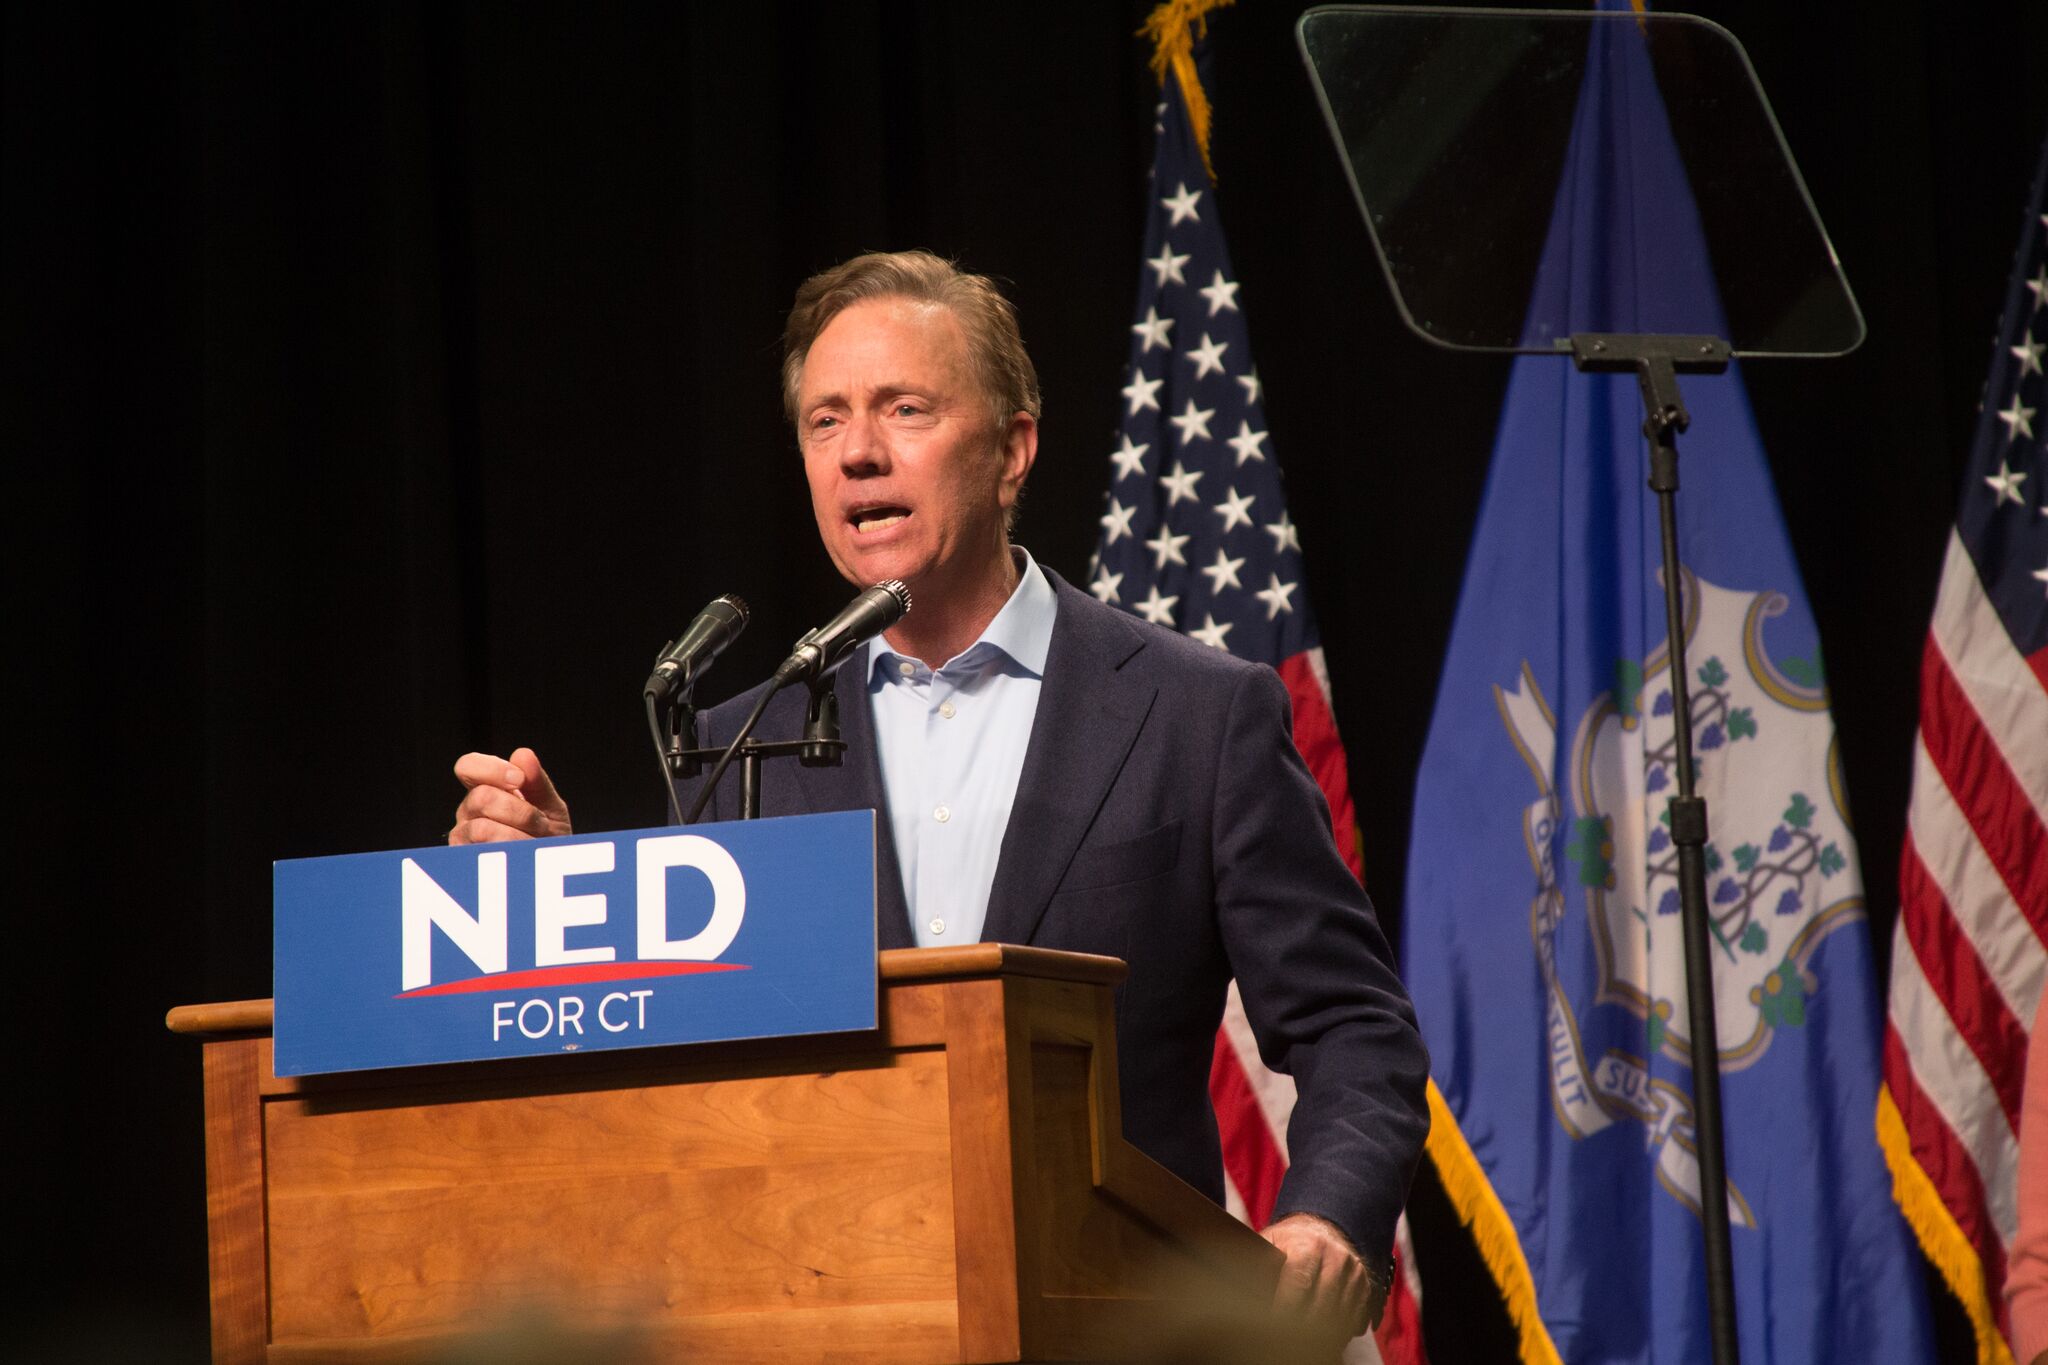 Cringeworthy? Morning Joe To Perform At Ned Lamont Inaugural – Only In ...